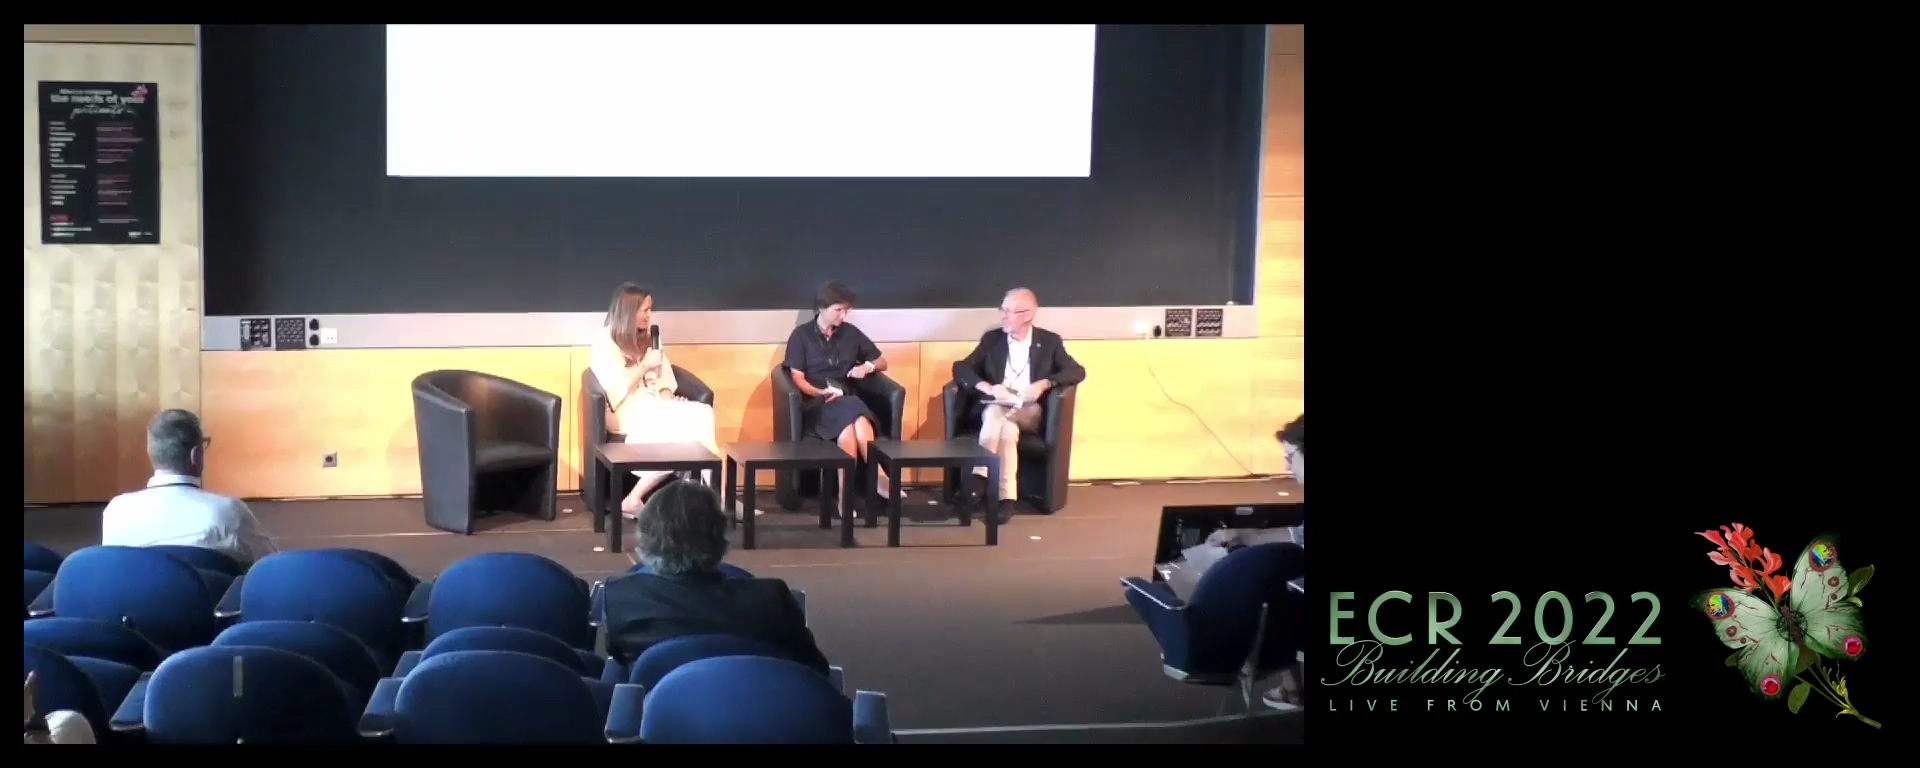 Panel discussion: Is the patient in focus? Should we consider liaison with other medical care professionals to support patients and caretakers/caregivers? - Caroline Justich, Vienna / AT, Erik Briers, Hasselt / BE, Katharina Gruber, Vienna / AT